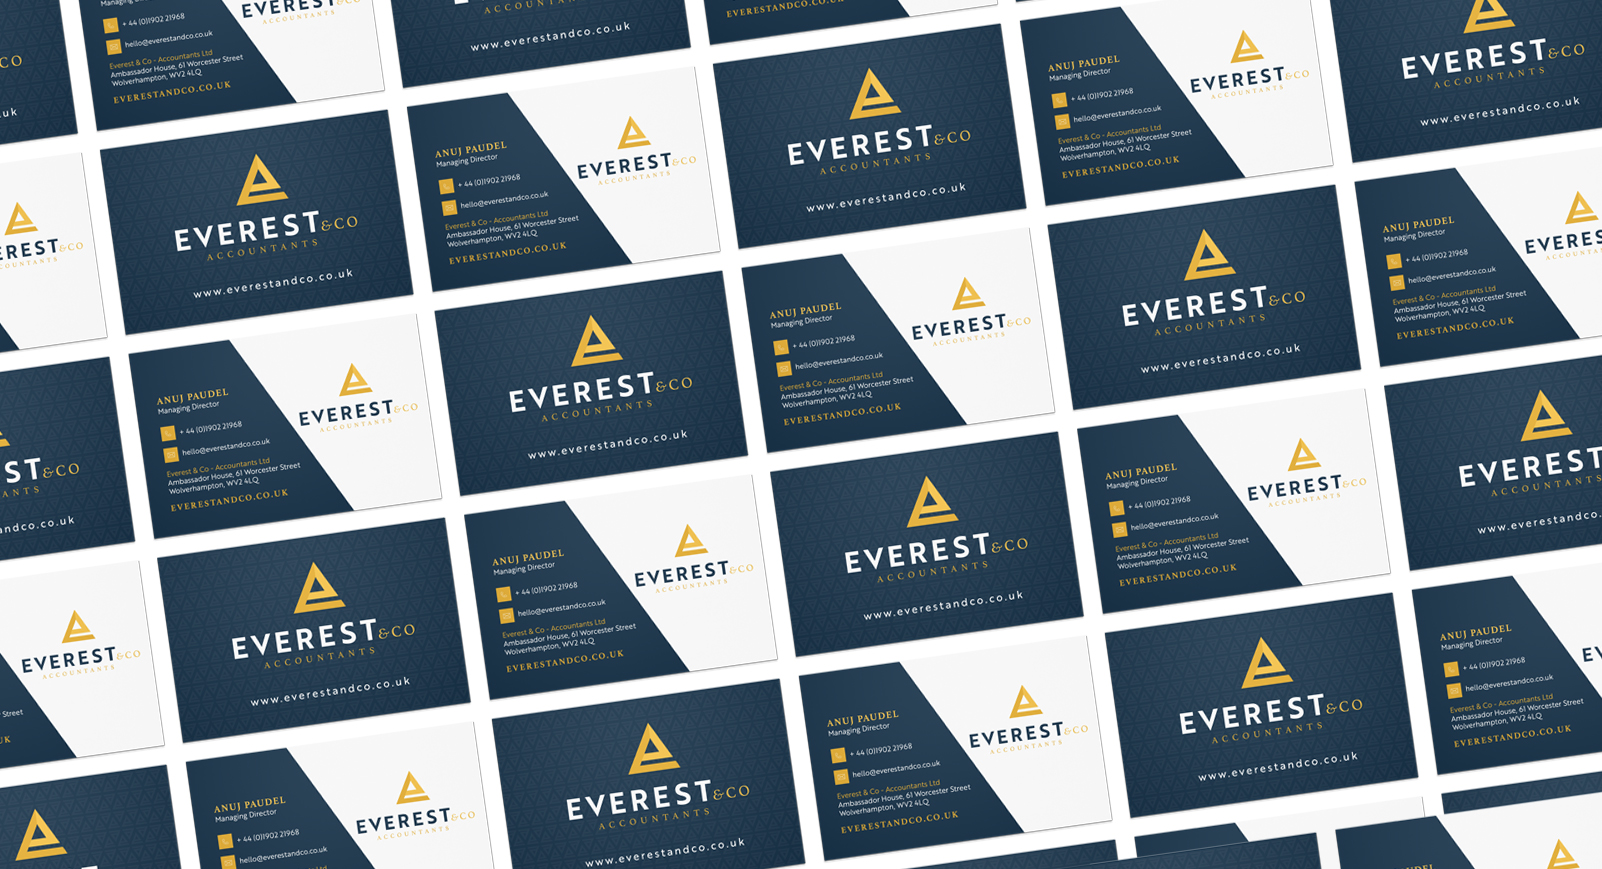 Design for Print - Business Cards - eighty3creative